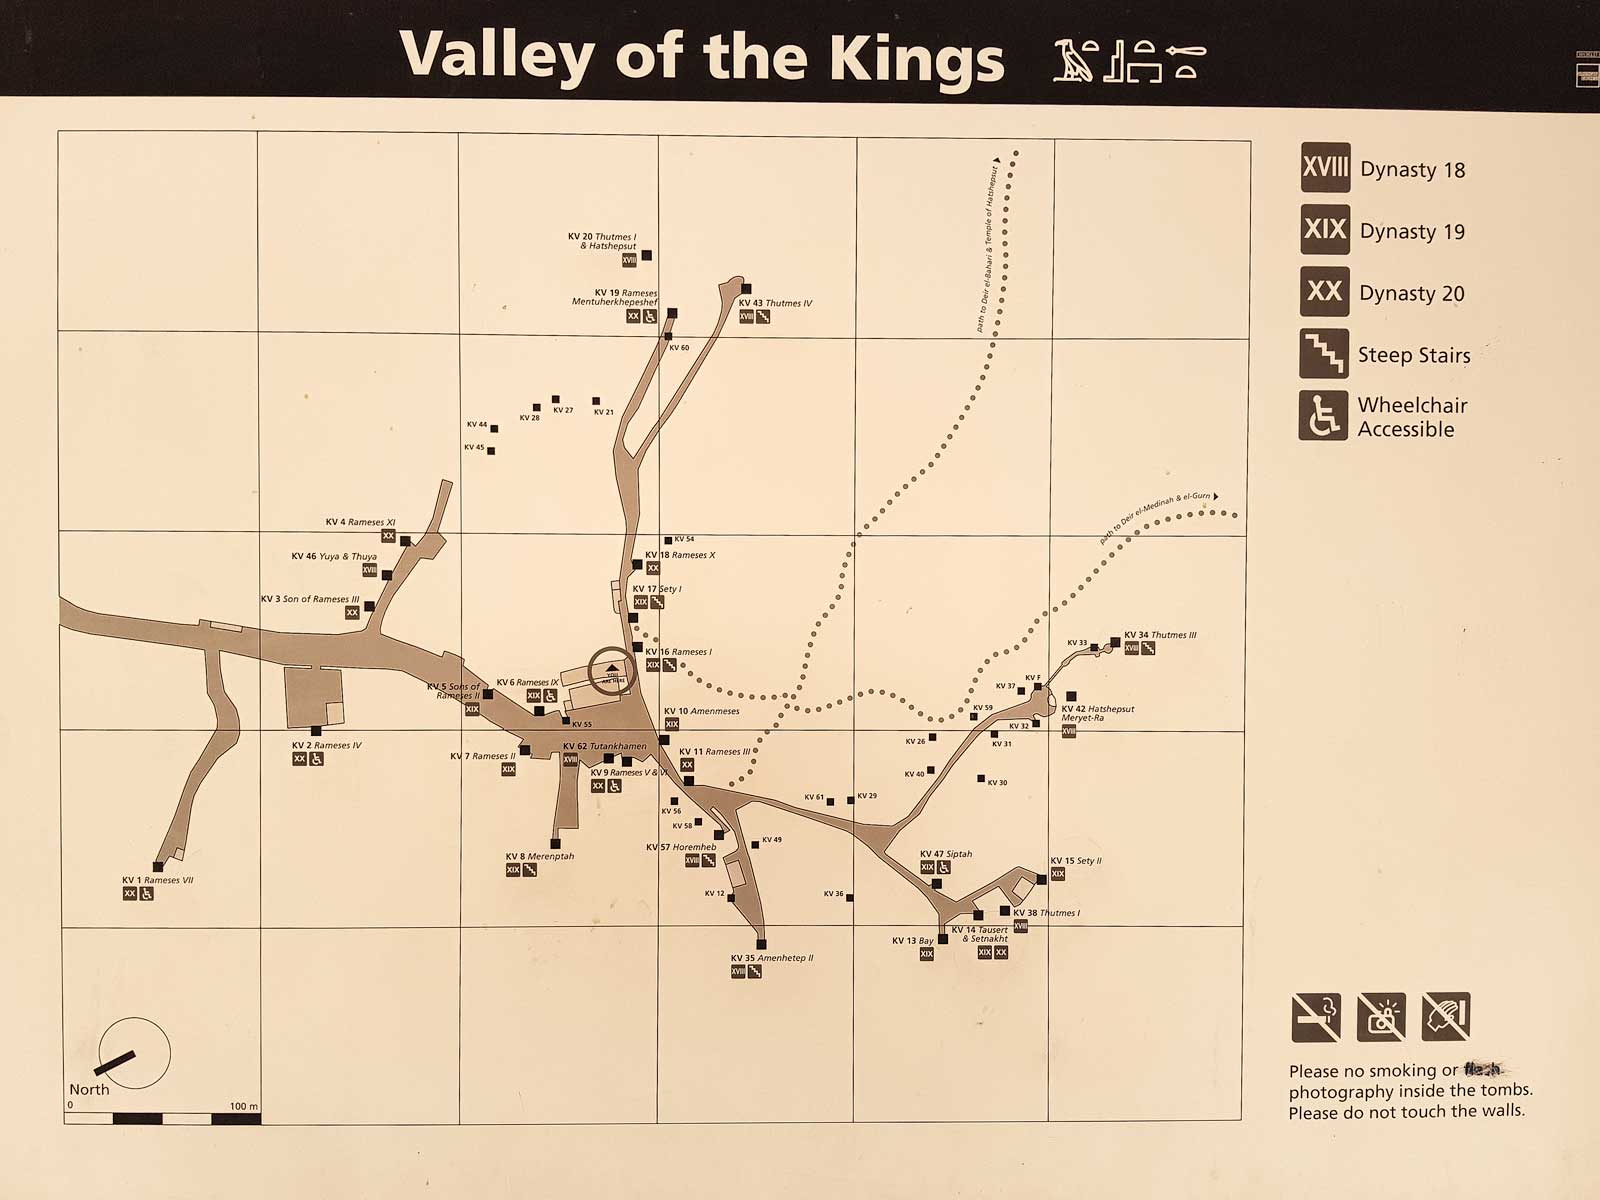 Valley of the kings map